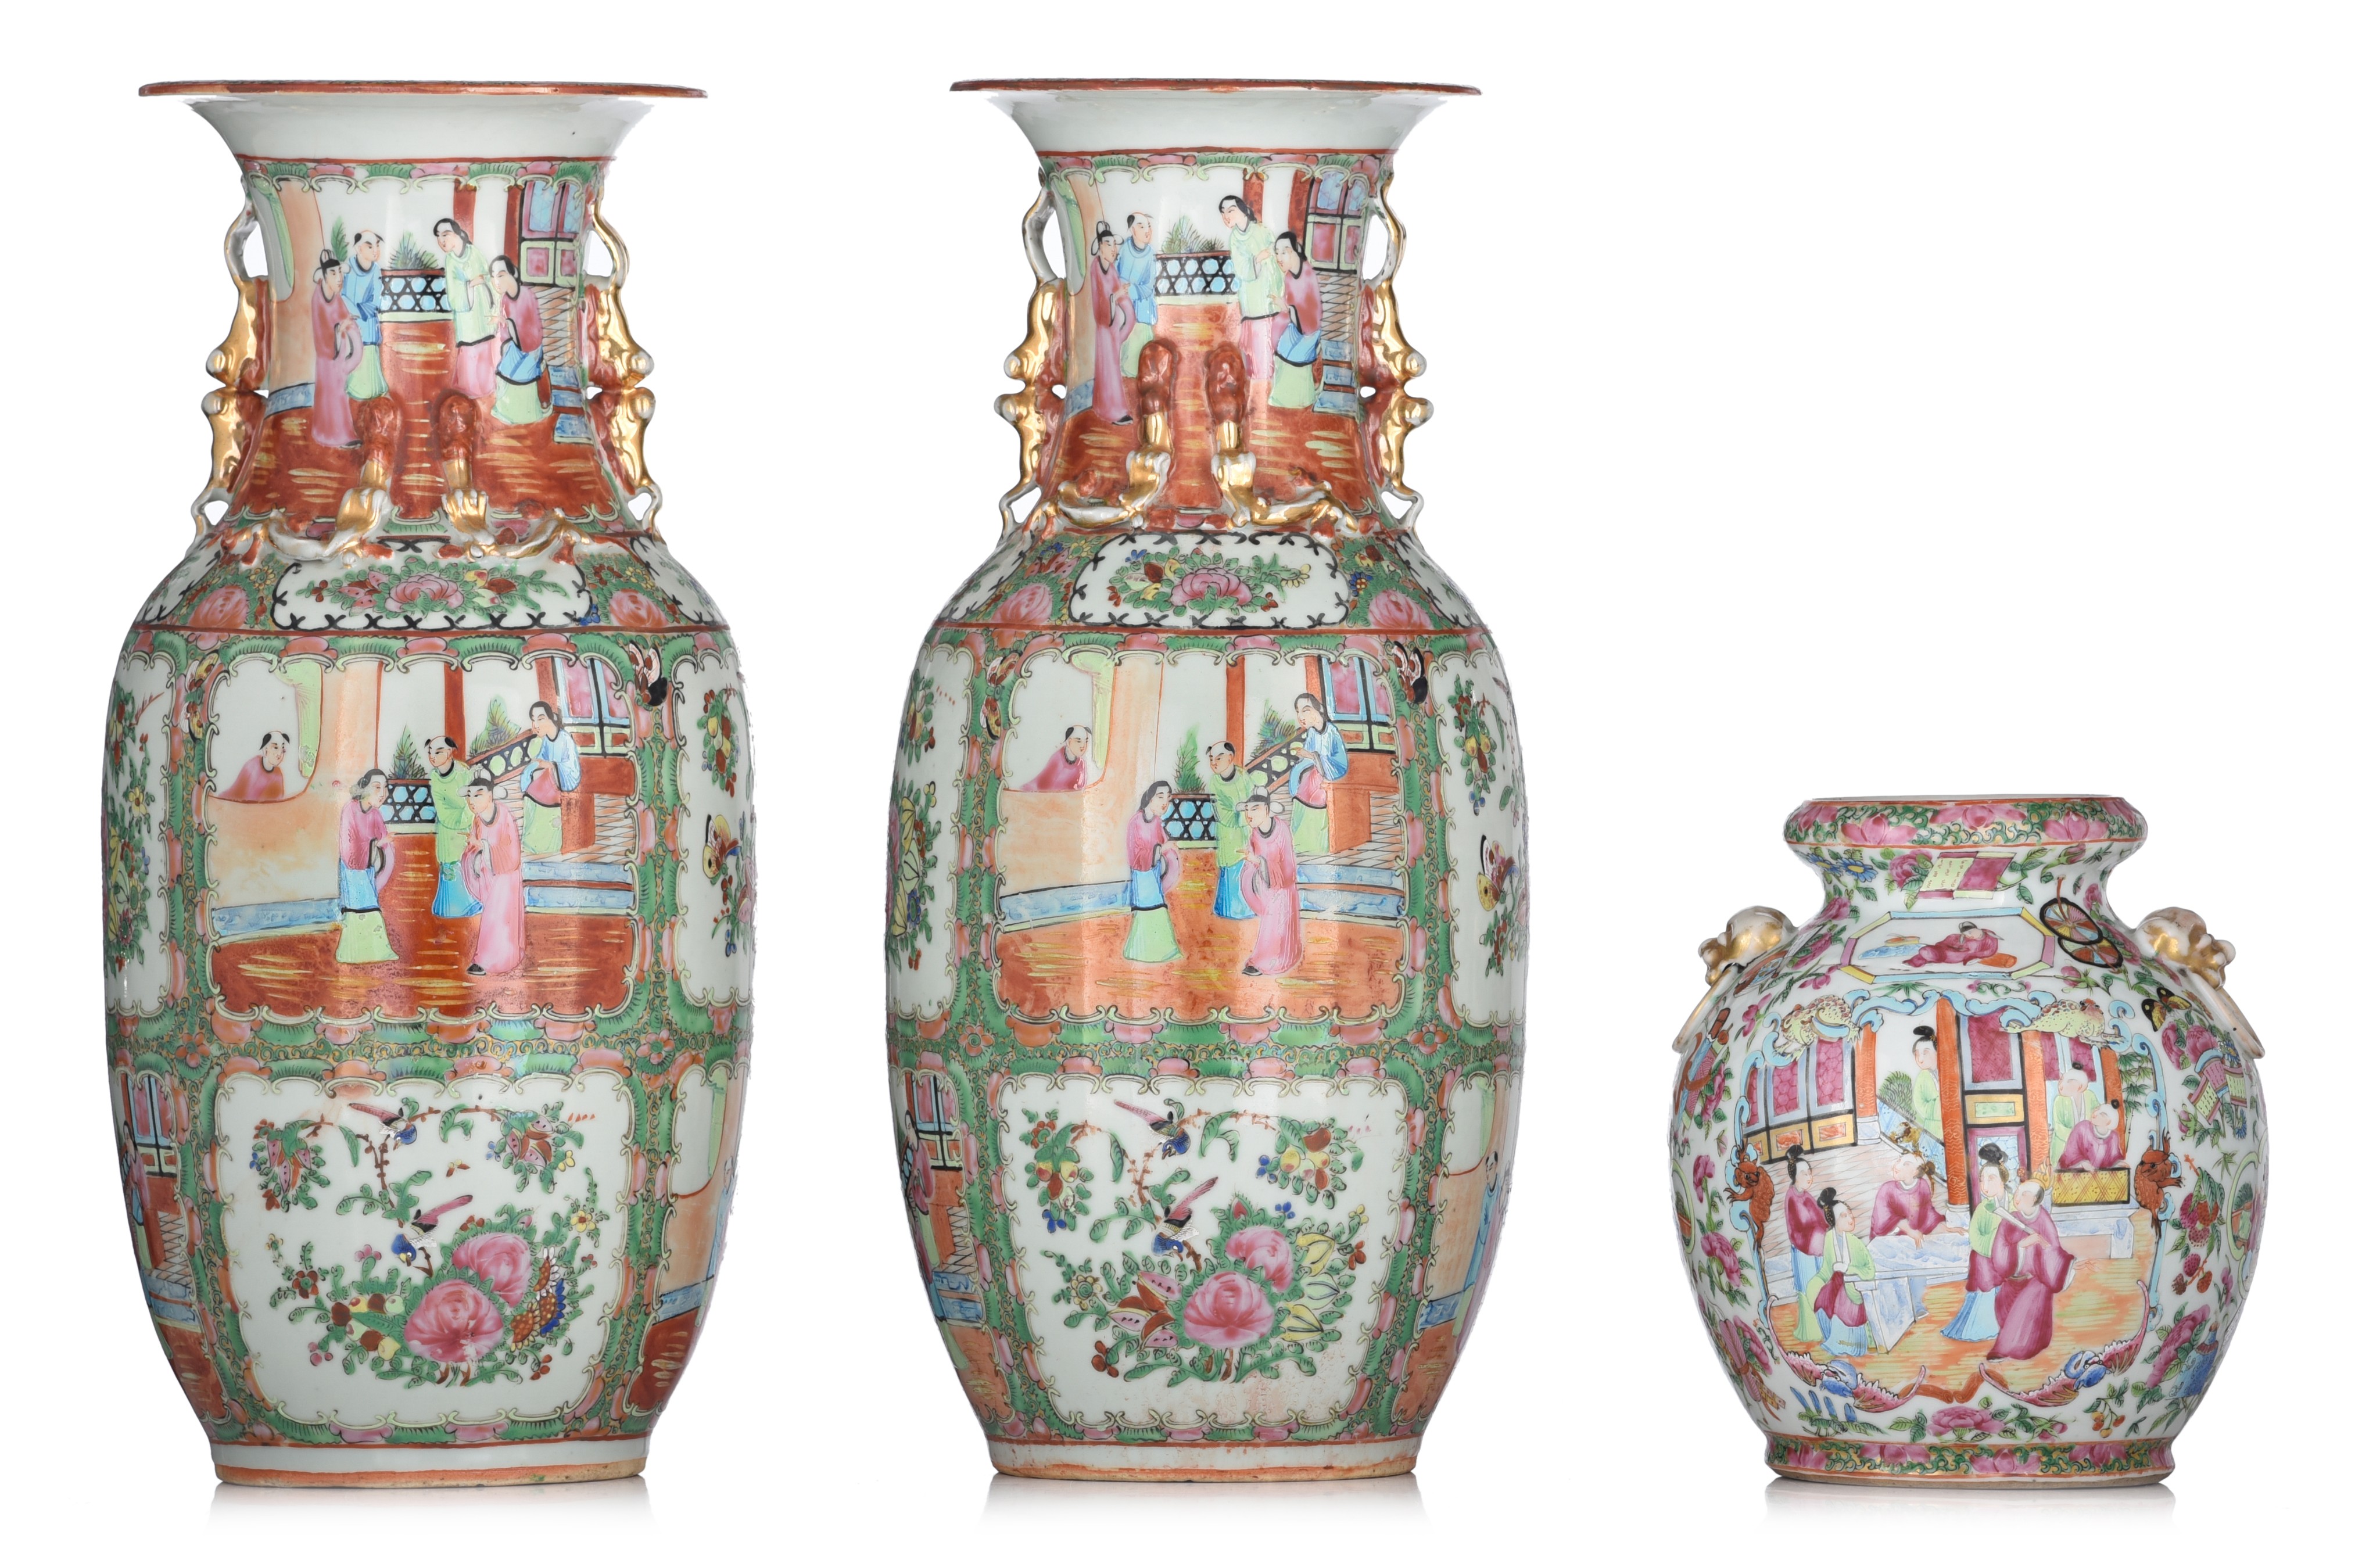 A similar pair of Chinese Canton famille rose vases, 19thC, H 44,5 cm - added a Chinese Canton pomeg